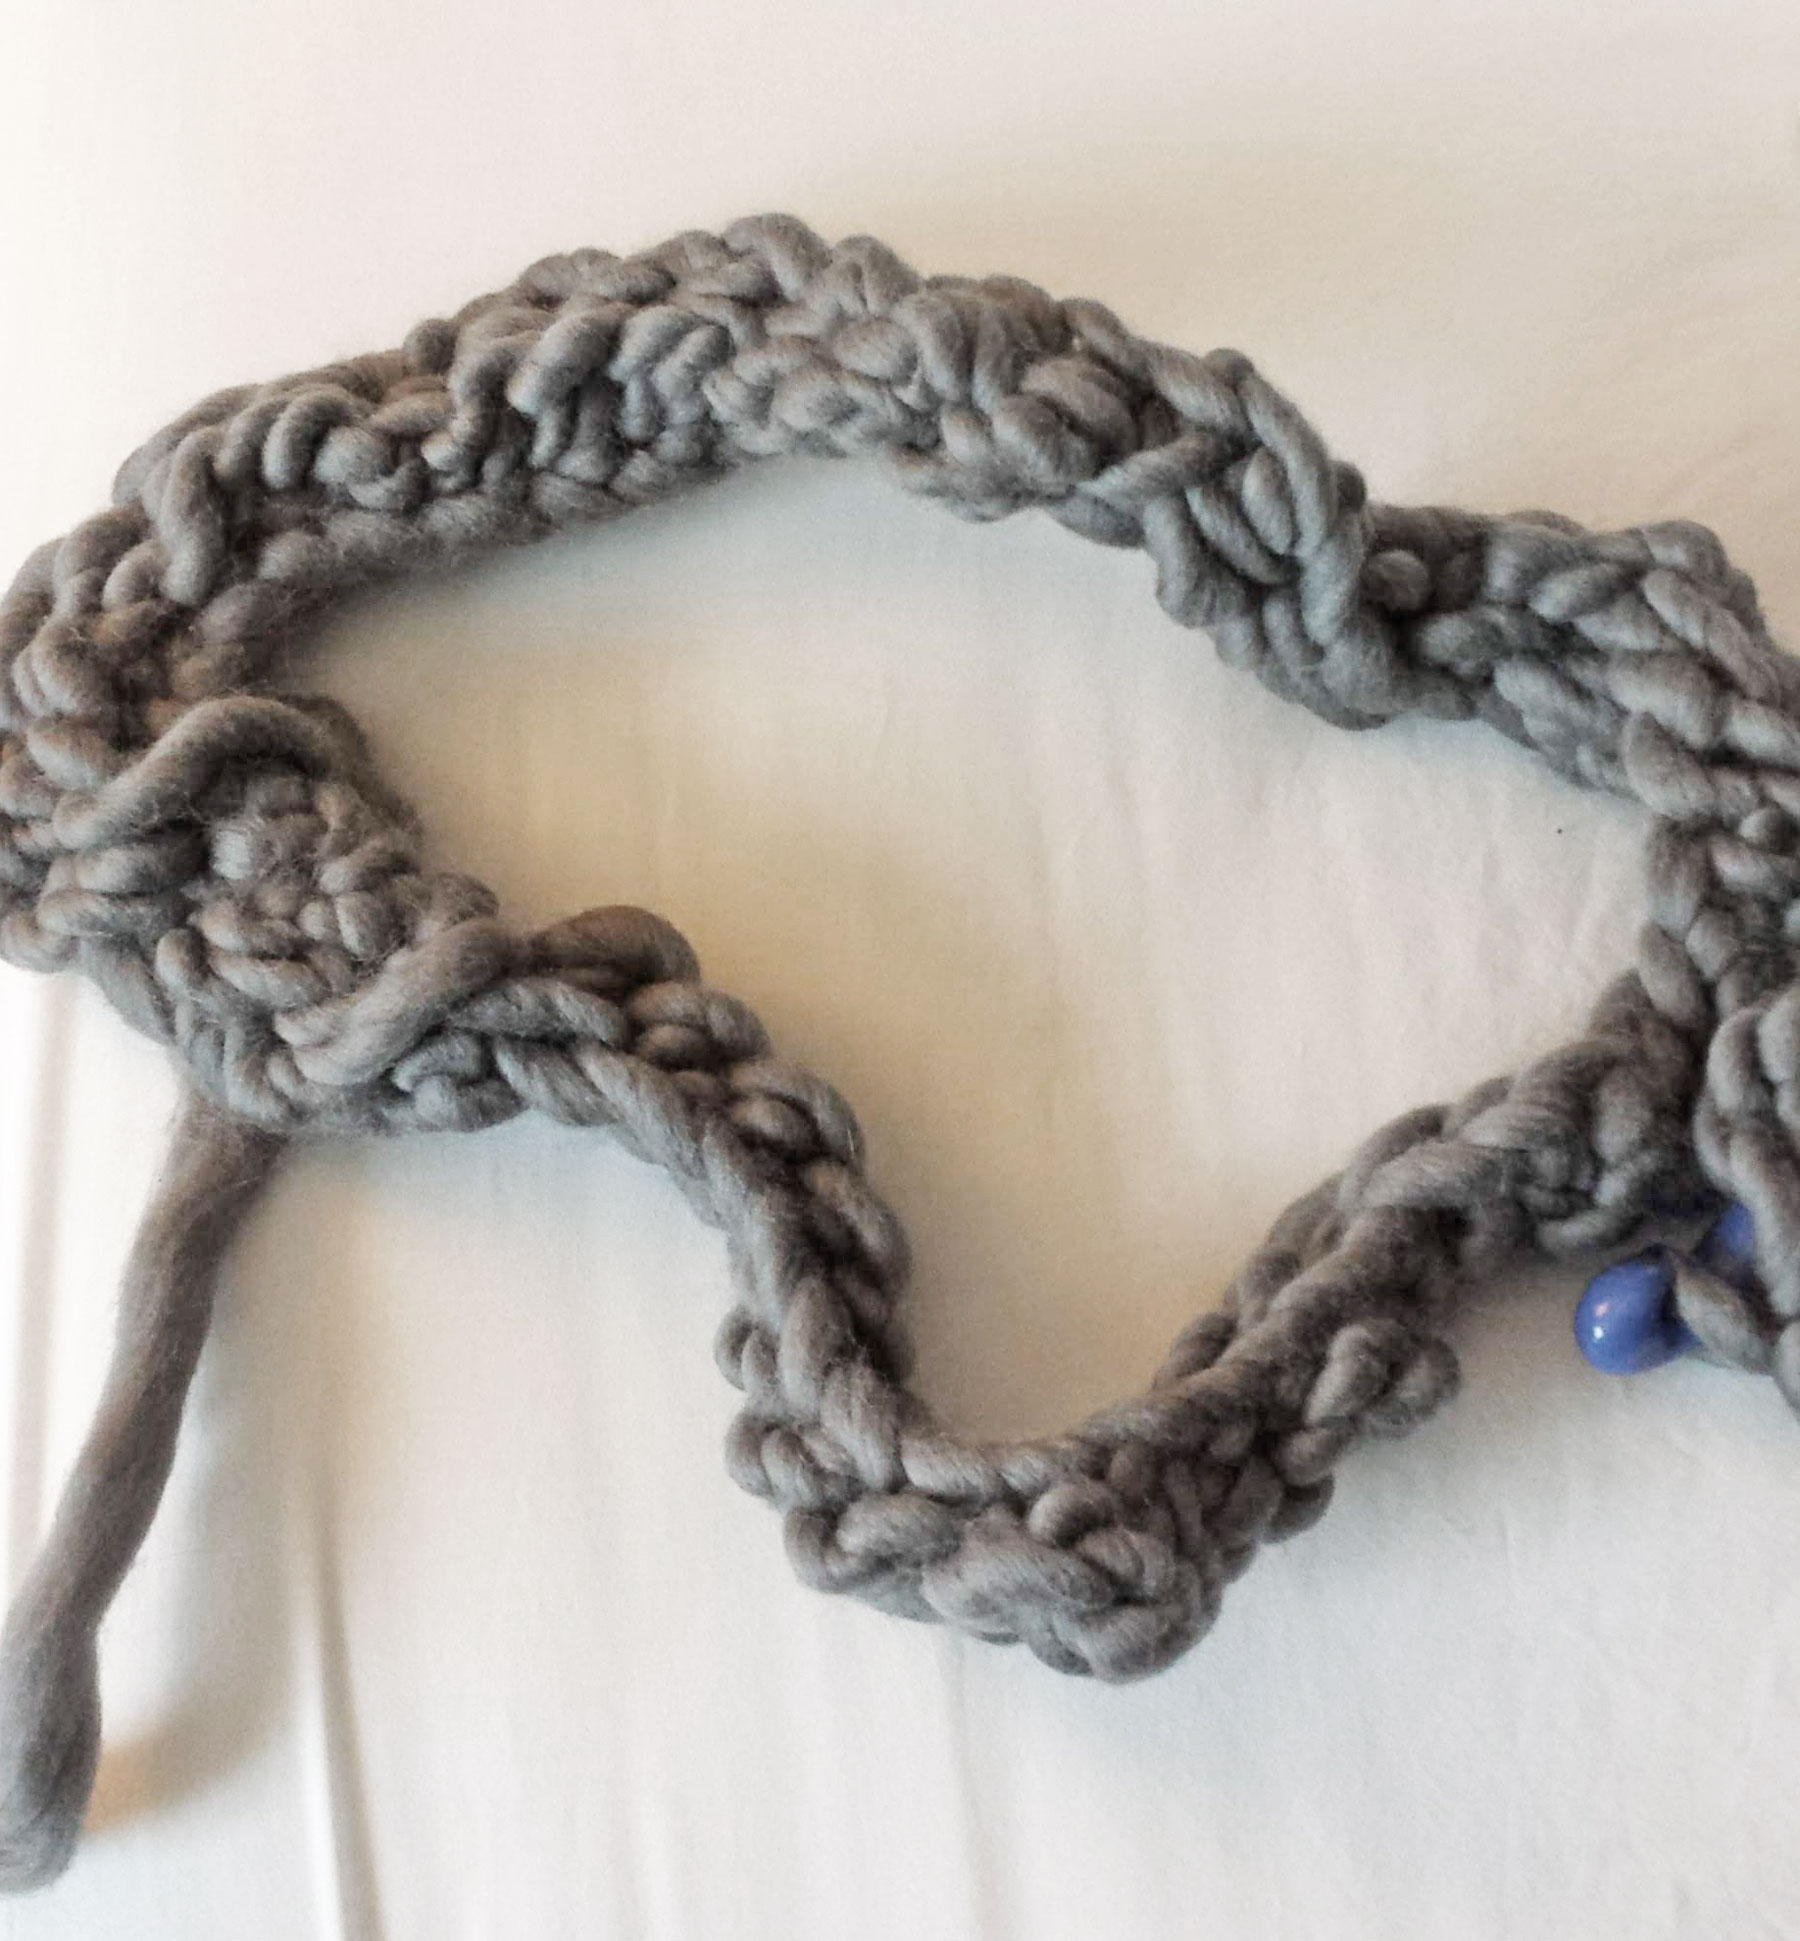 tightly woven and knotted gnarly attempt at crochet made with thick gray yarn